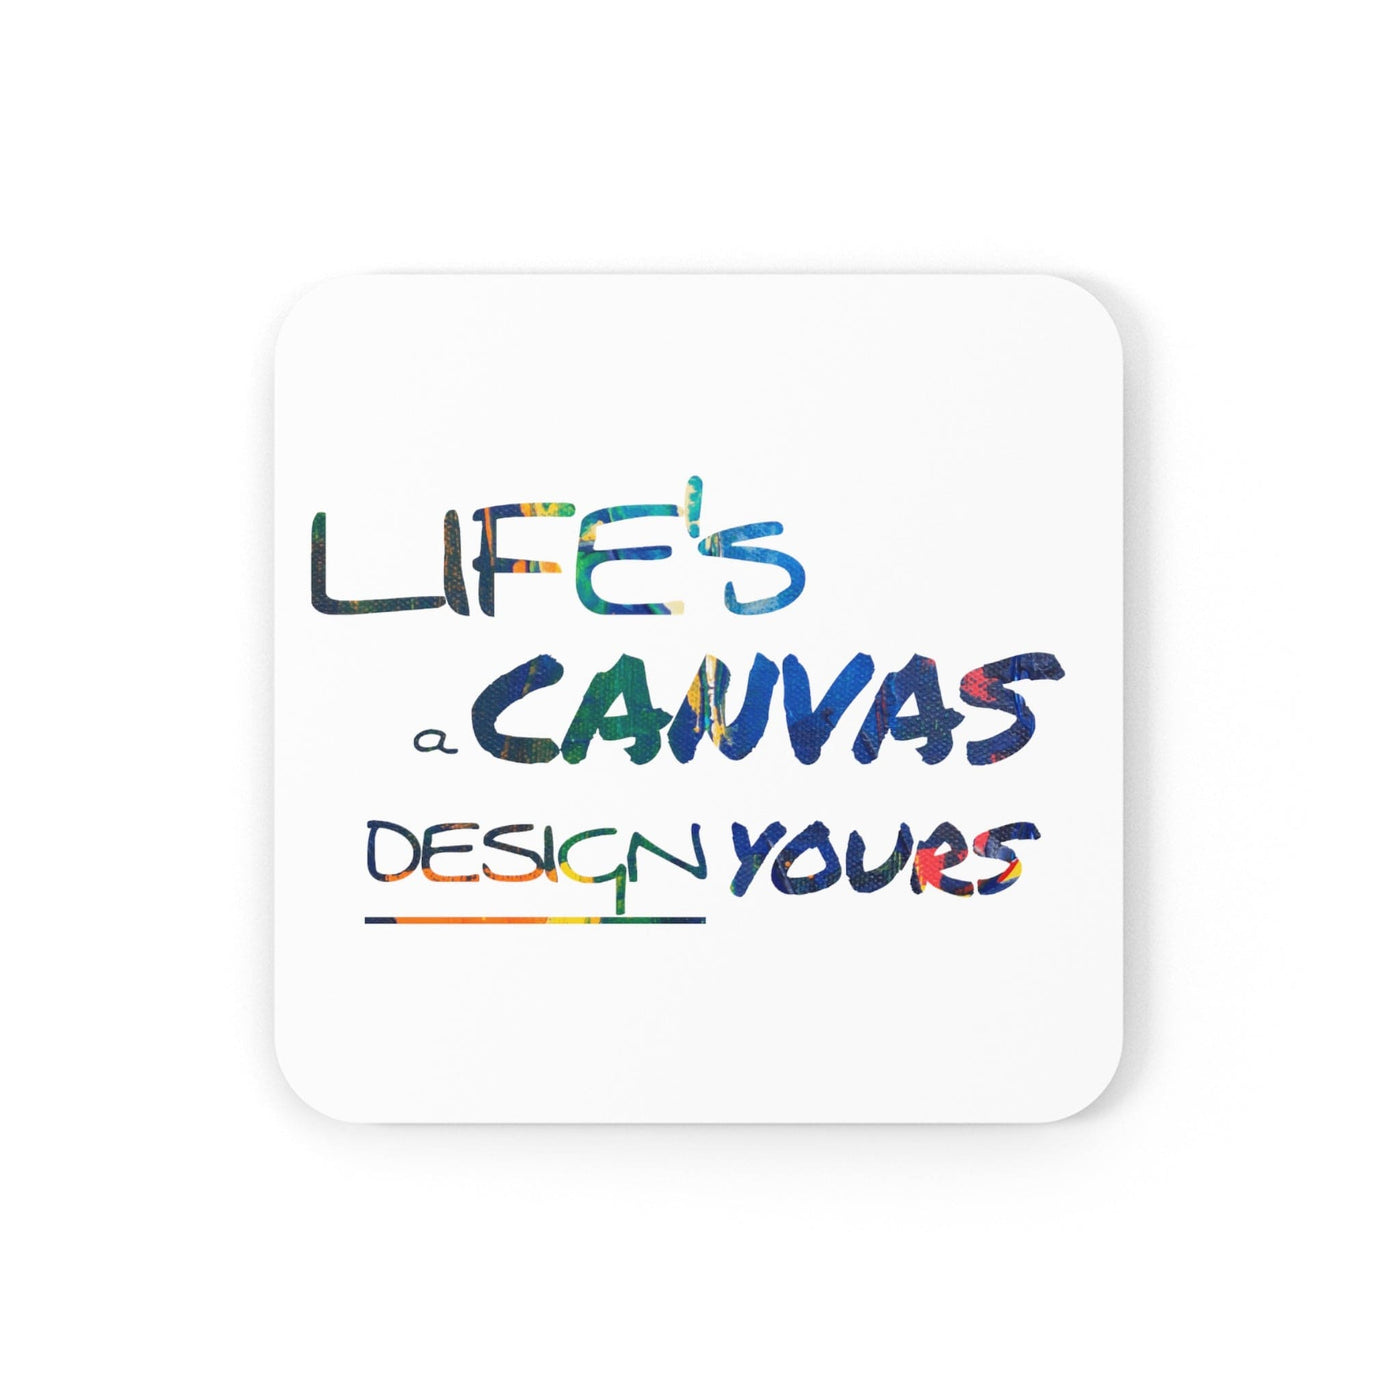 Handcrafted Square Coaster Set Of 4 For Drinks And Cups Life’s a Canvas